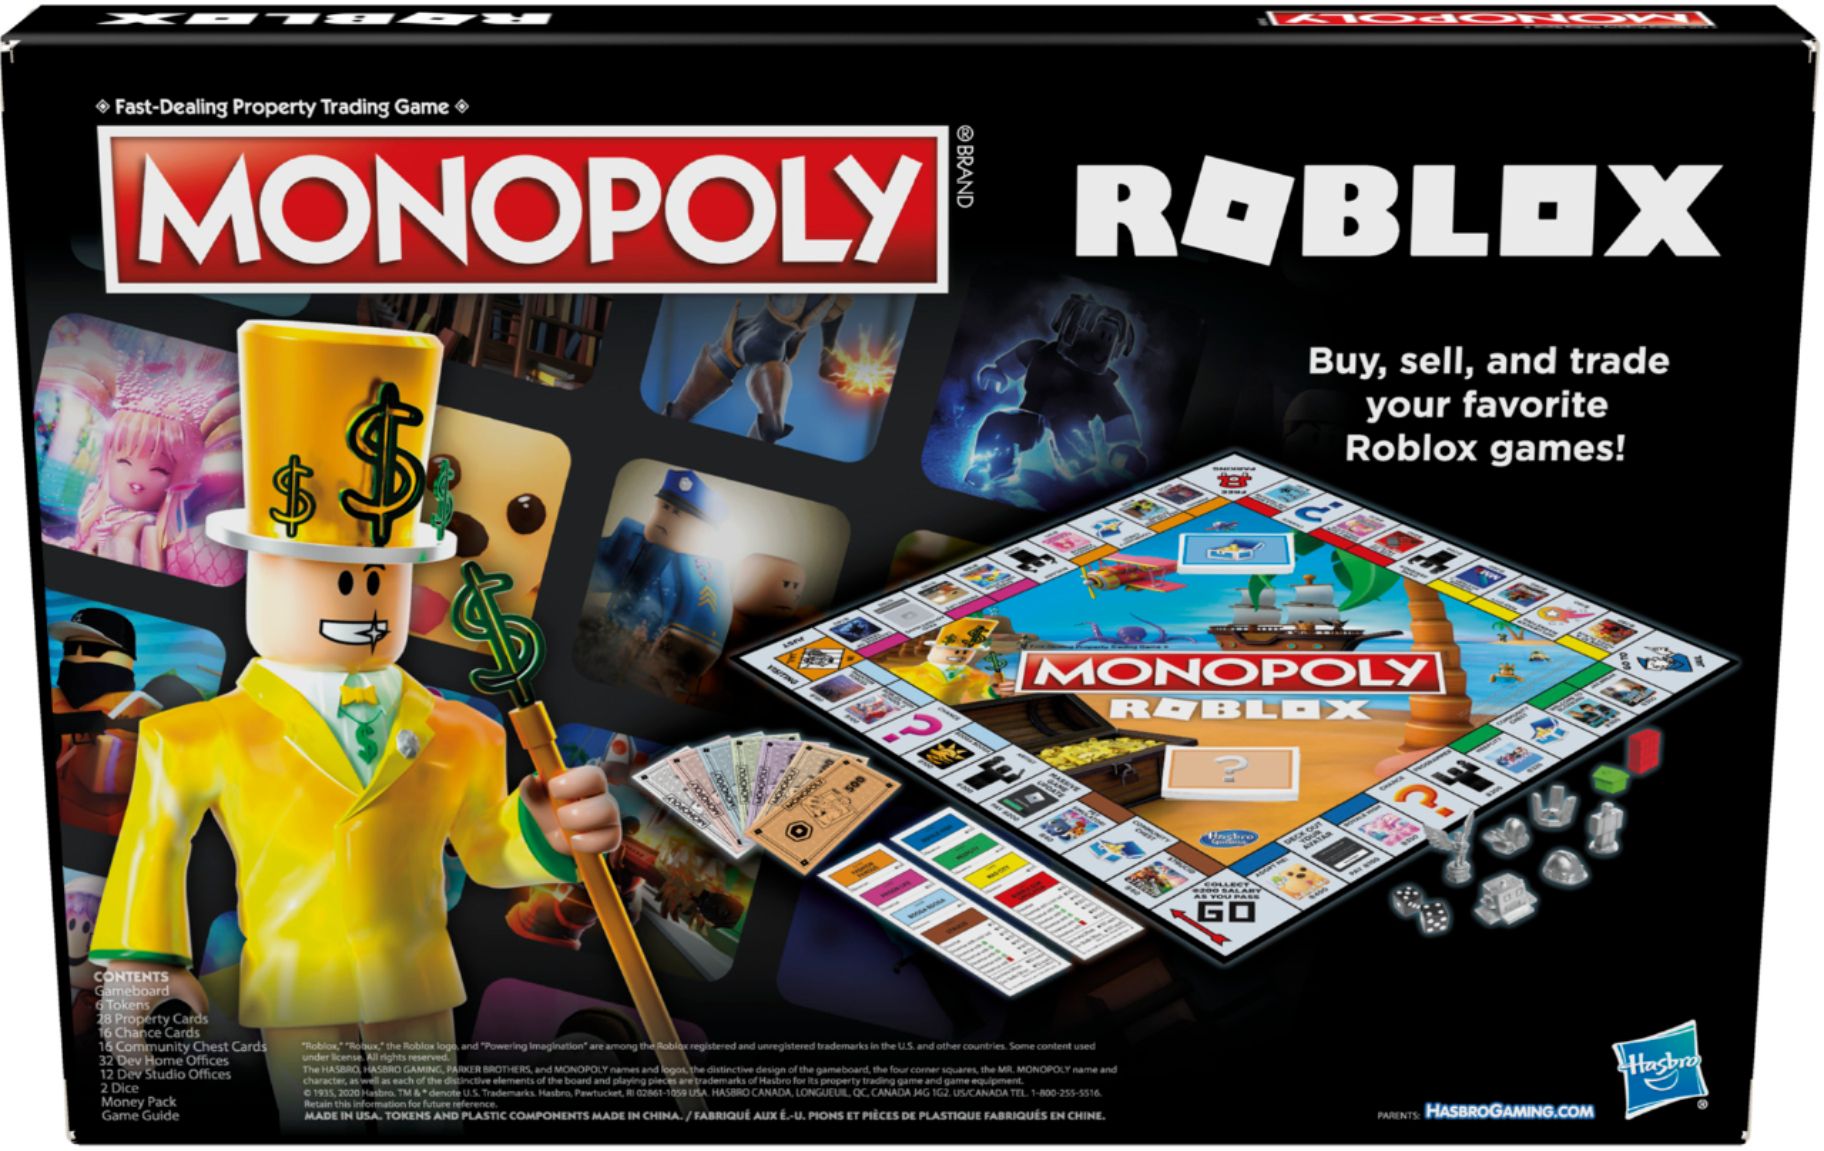 Hasbro, Roblox Team Up for NERF, Monopoly x Roblox Crossover - The